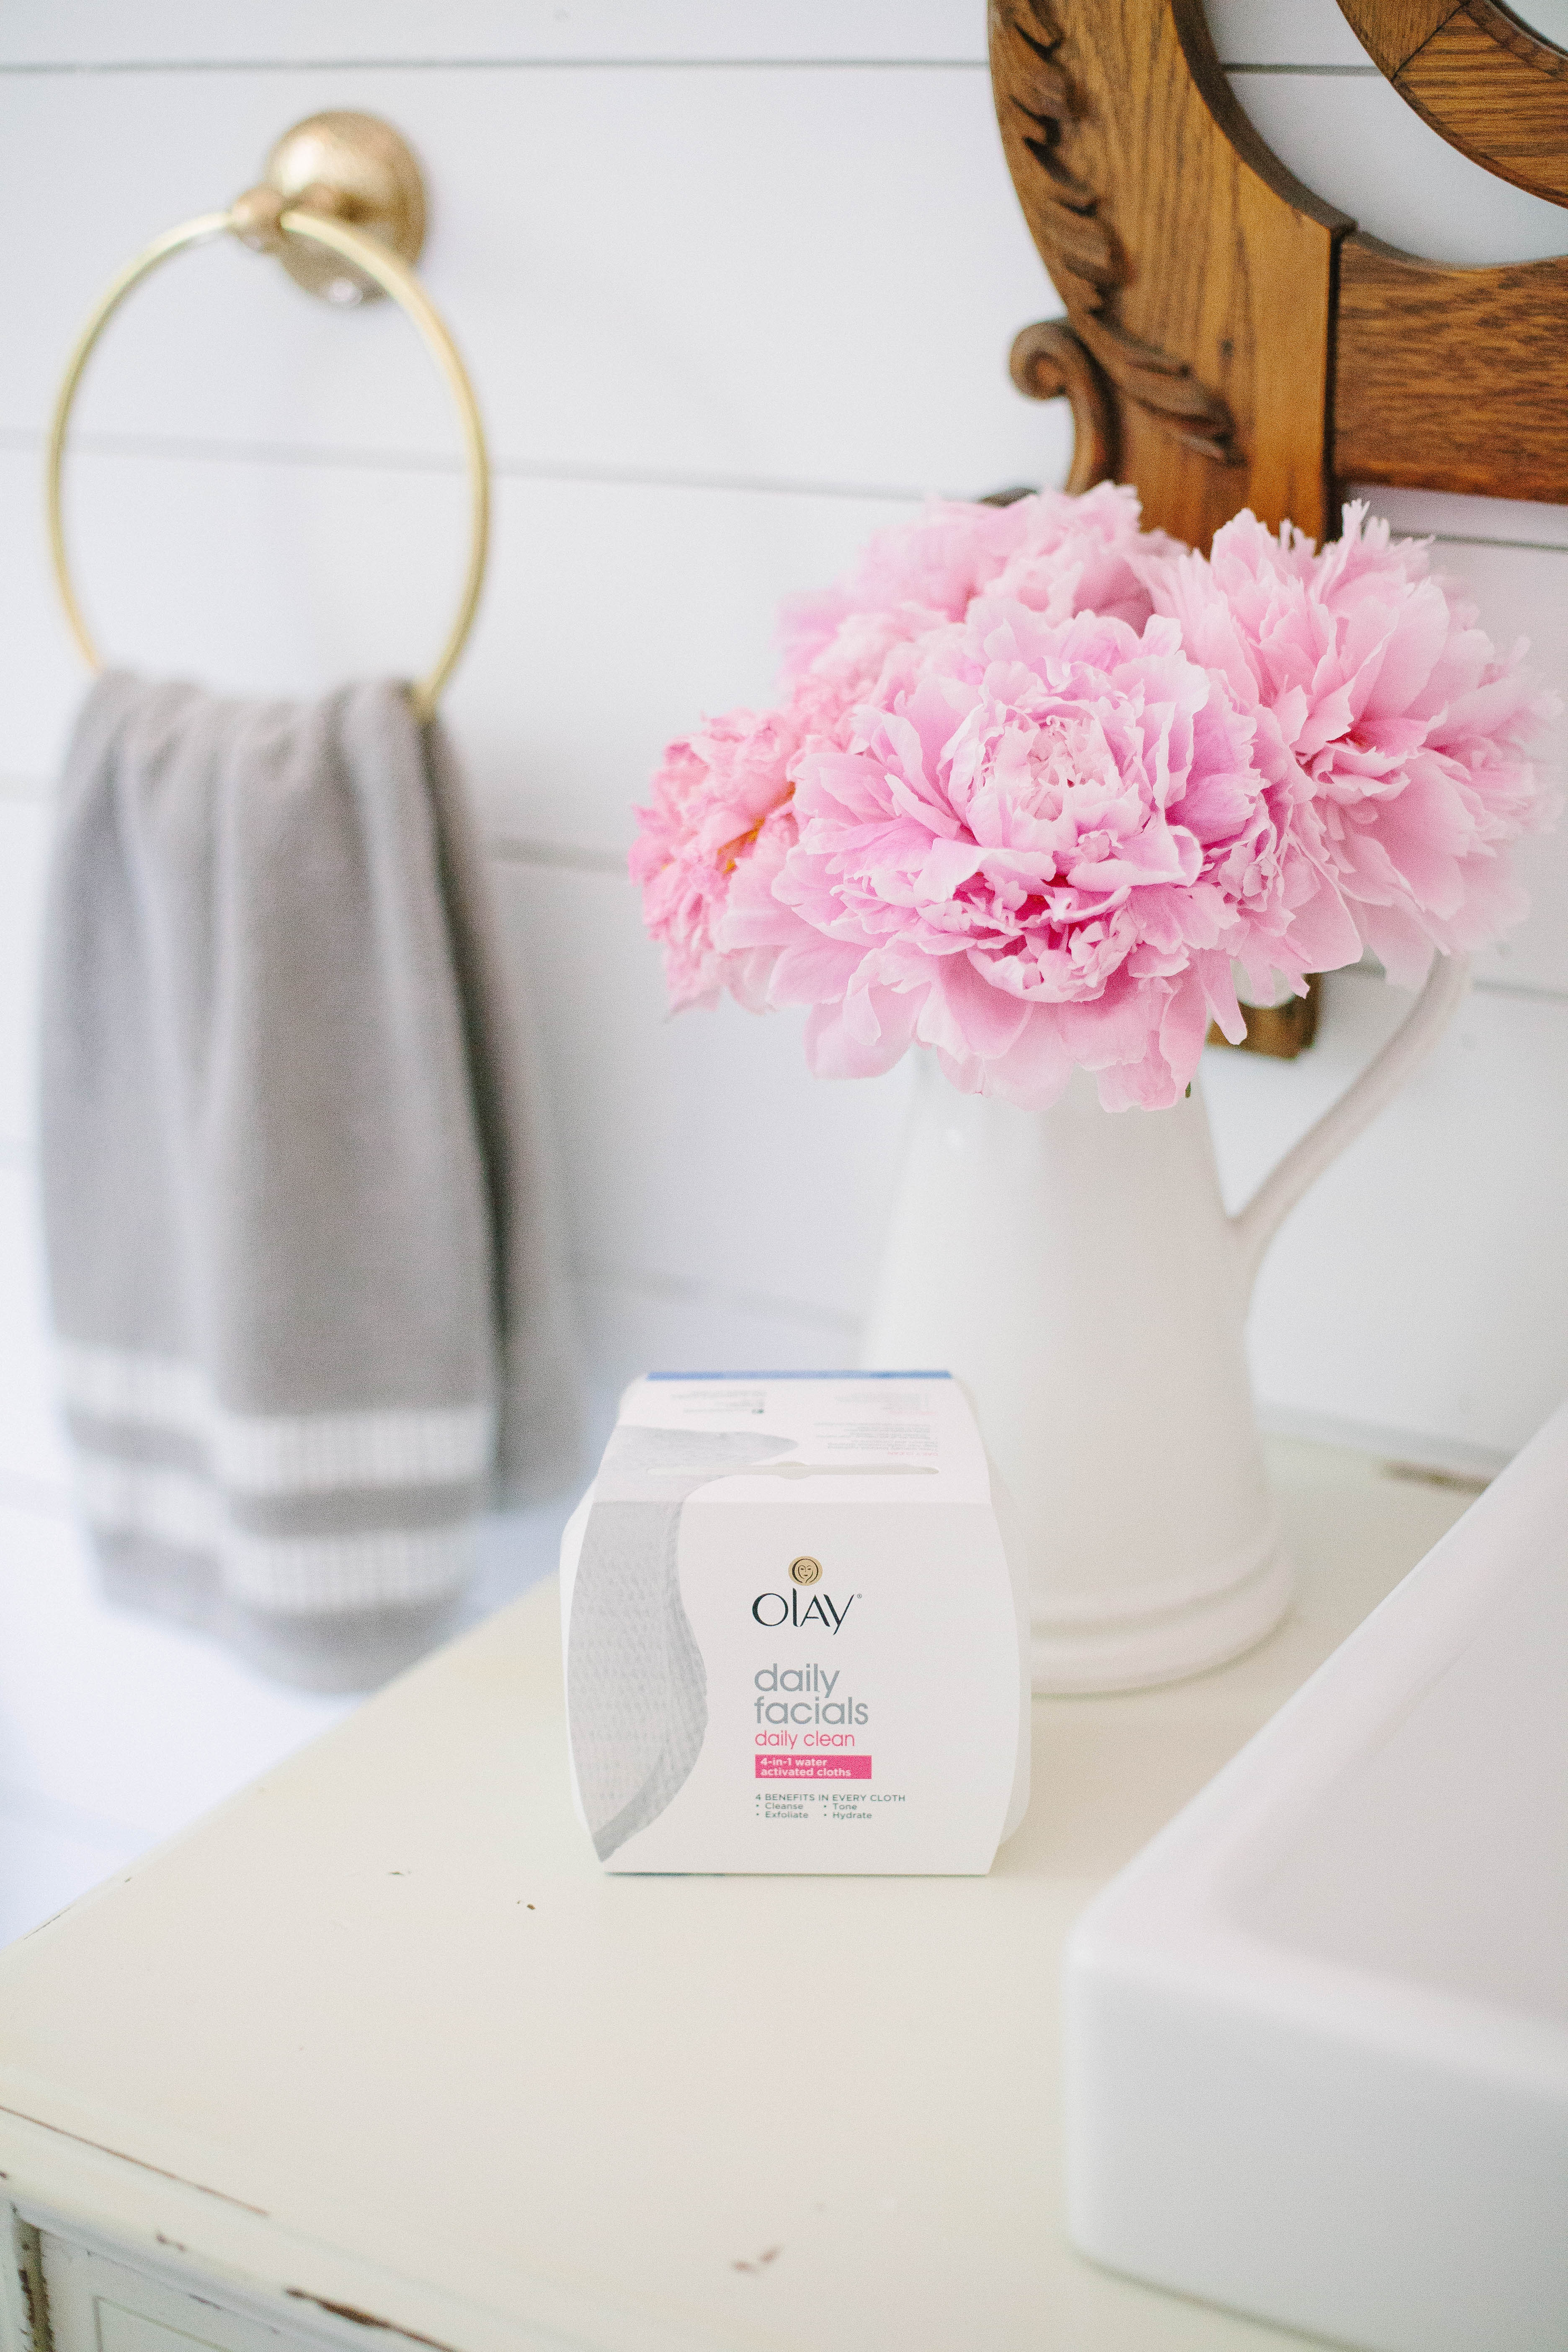 Busy mom and looking to cut down on your morning routine? Check out this 5 Minute Mom Skincare Routine featuring one product that does 4 steps in 1!